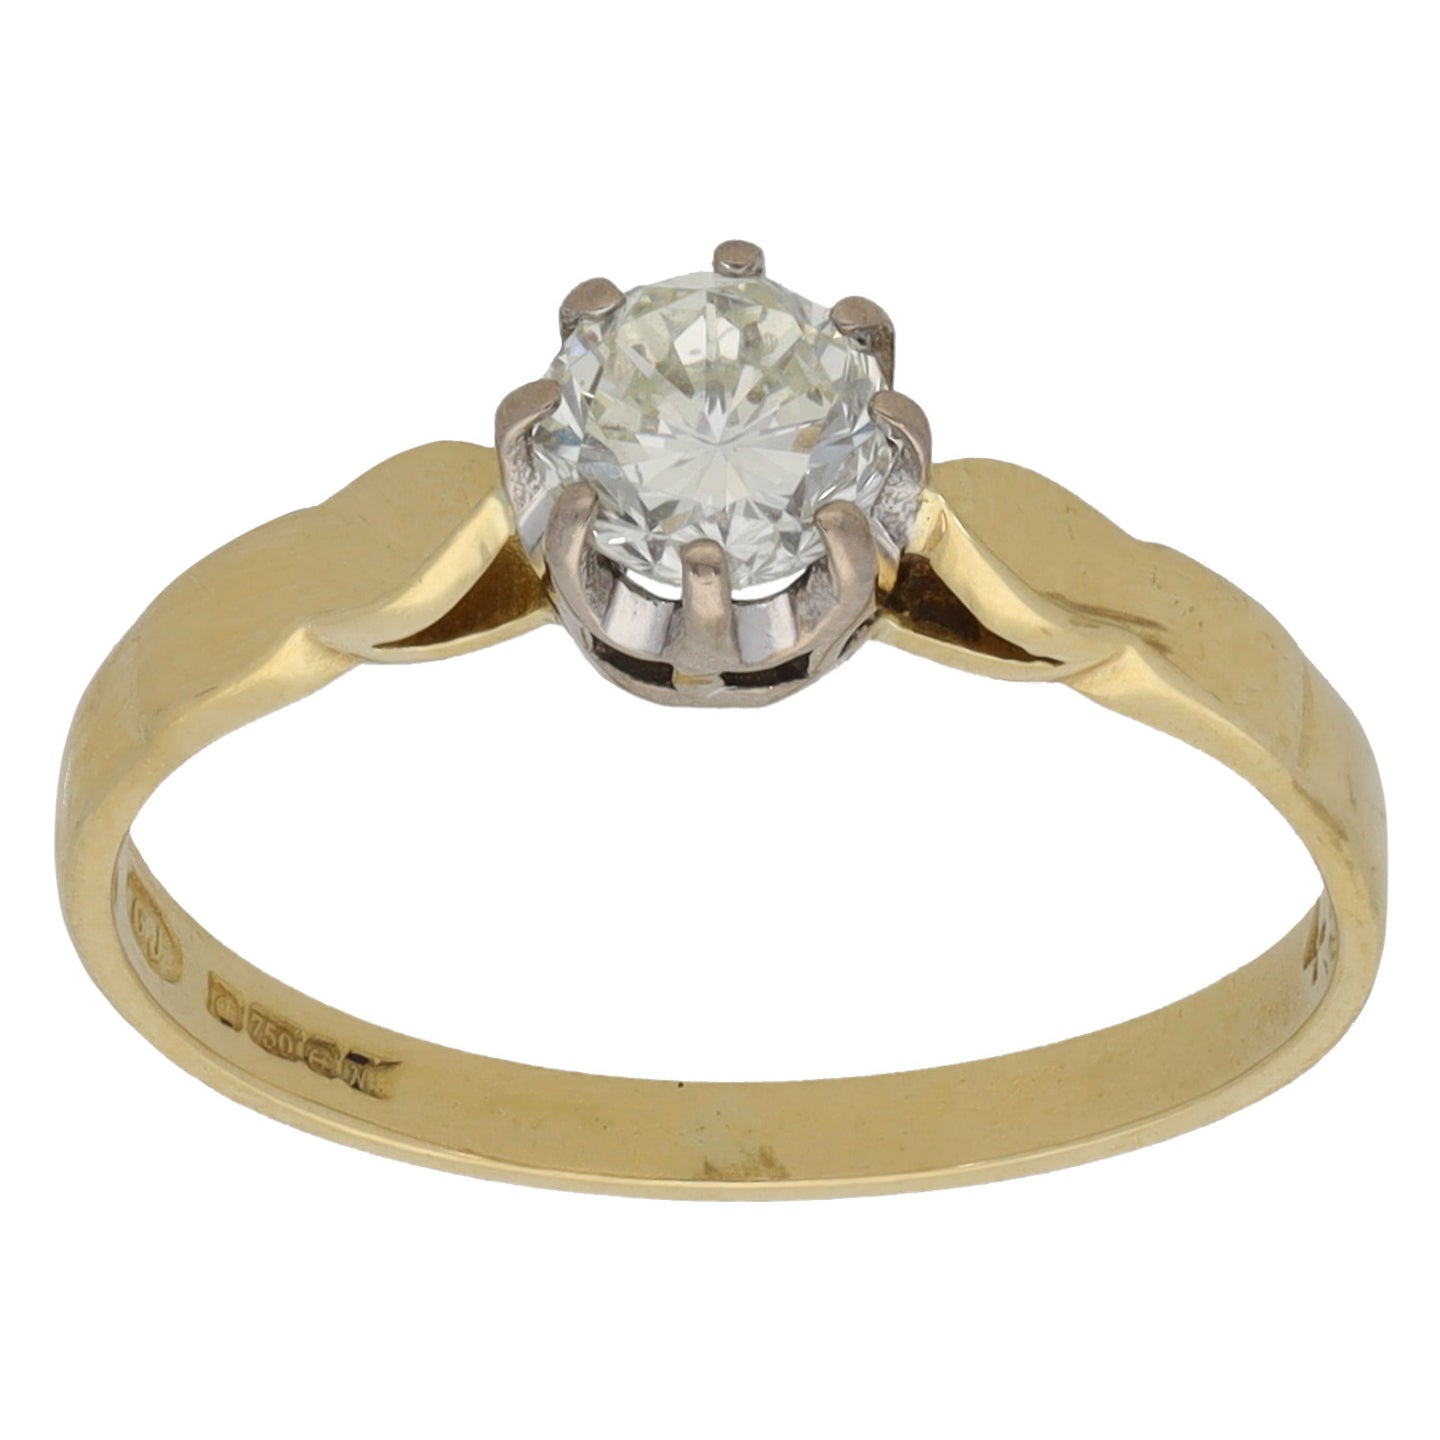 18ct Gold 0.45ct Diamond Solitaire Ring Size M